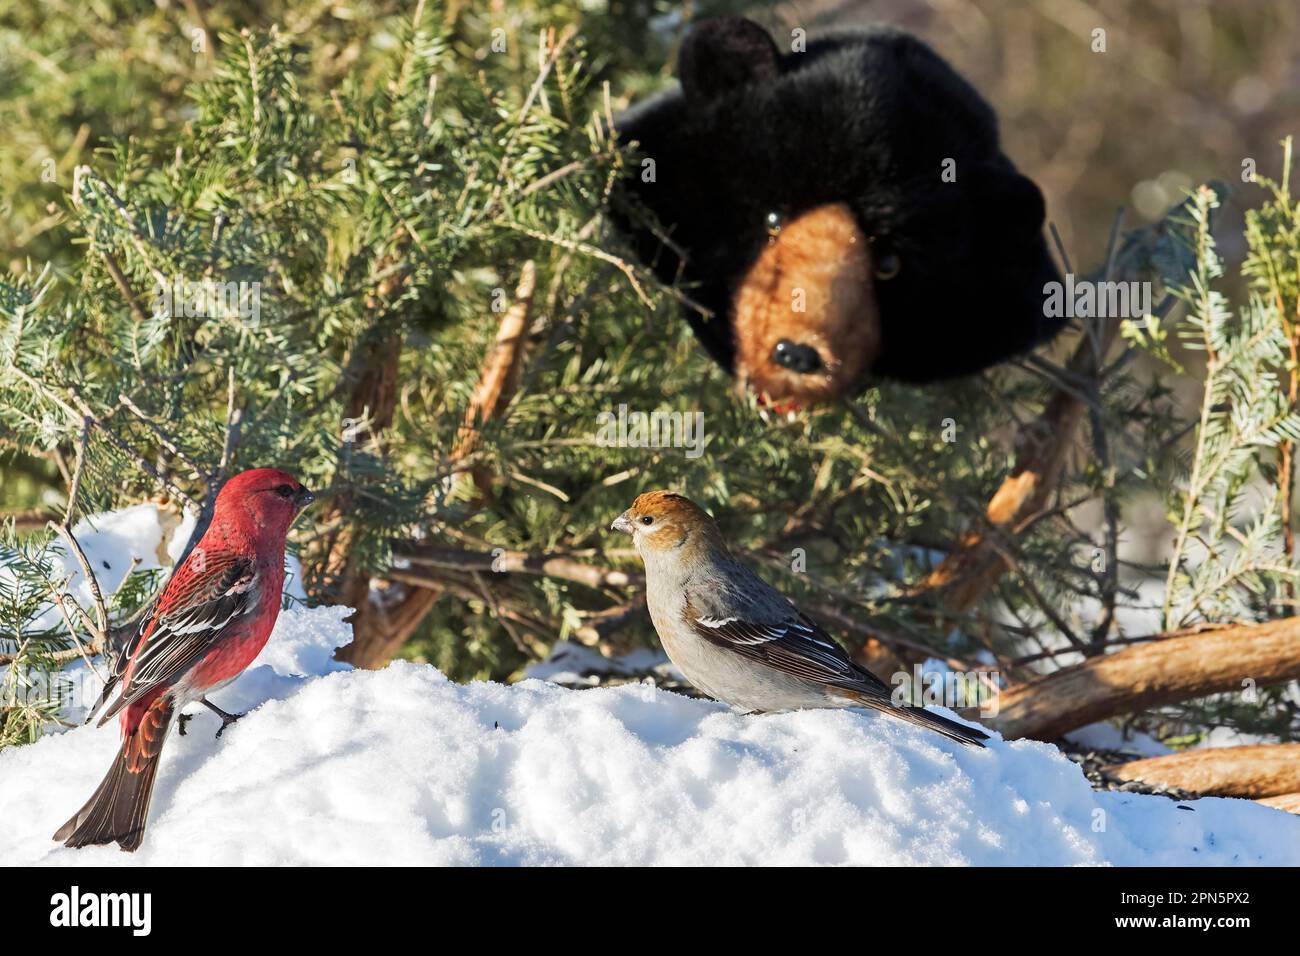 Male and female pine beak feeding a bird feeder, The background shows a stuffed bear being used for a film project pine grosbeak (Pinicola Stock Photo